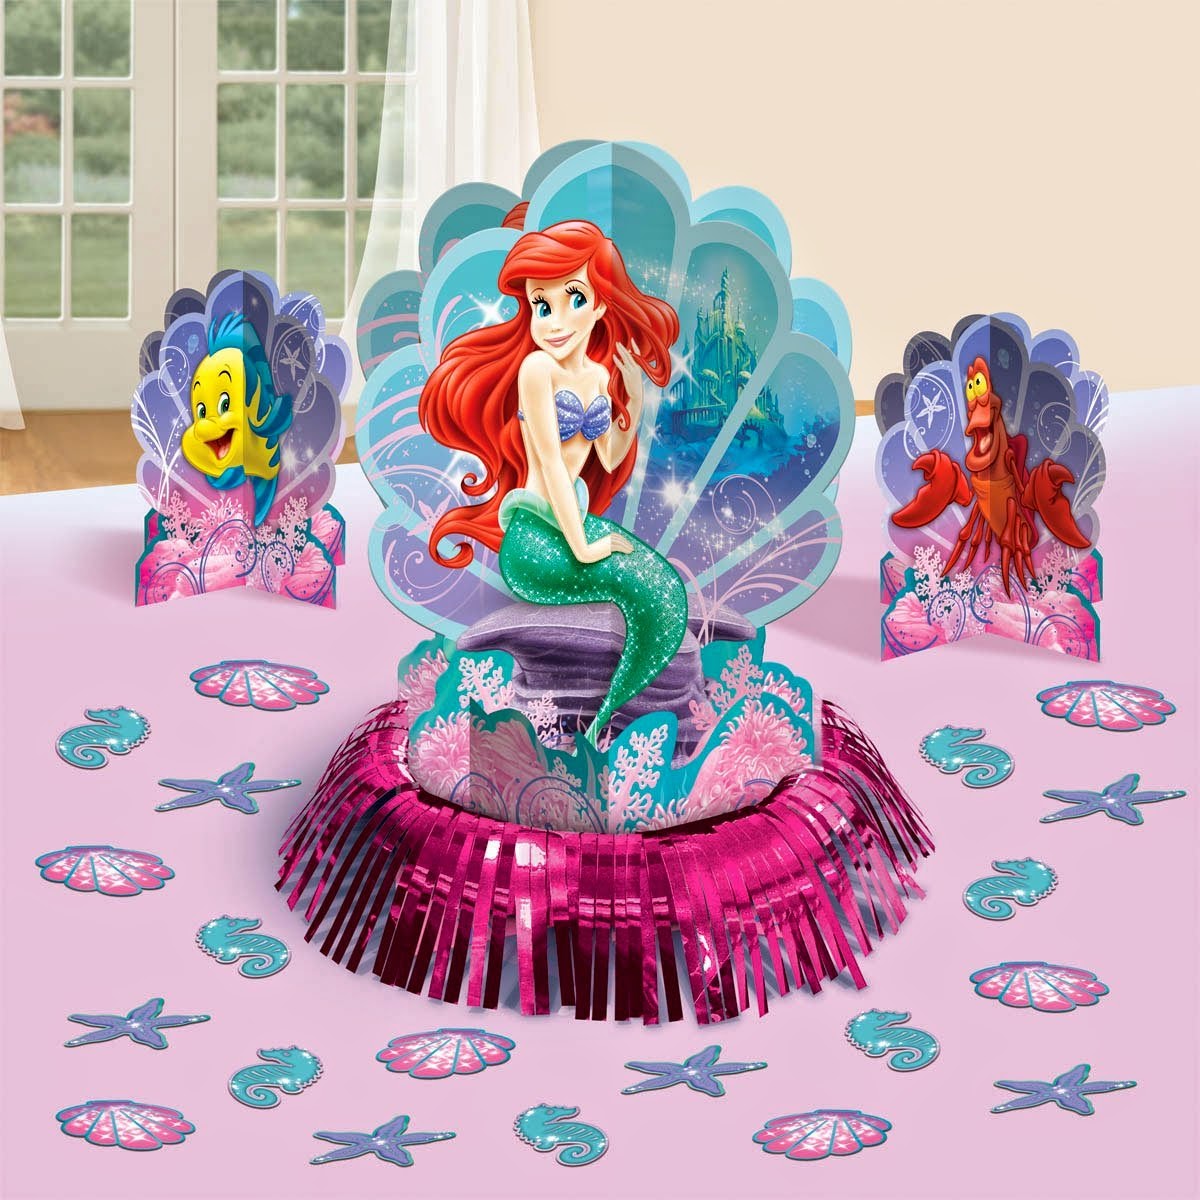 Disney's Little Mermaid Themed Party Supplies and Ideas Fun Themed